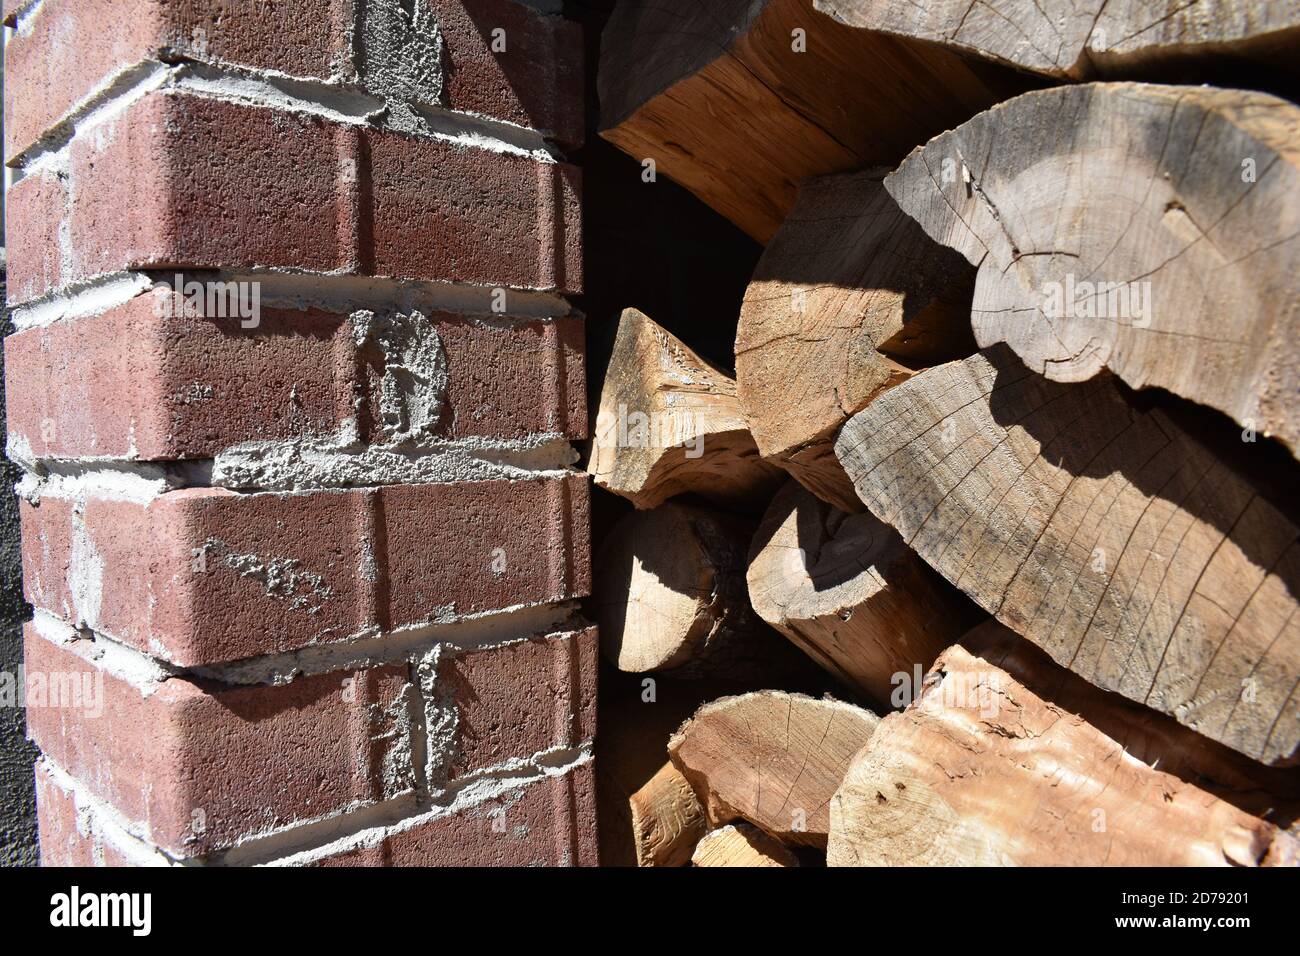 Closeup shot of stacked cedar wood with red brick in a fireplace Stock Photo